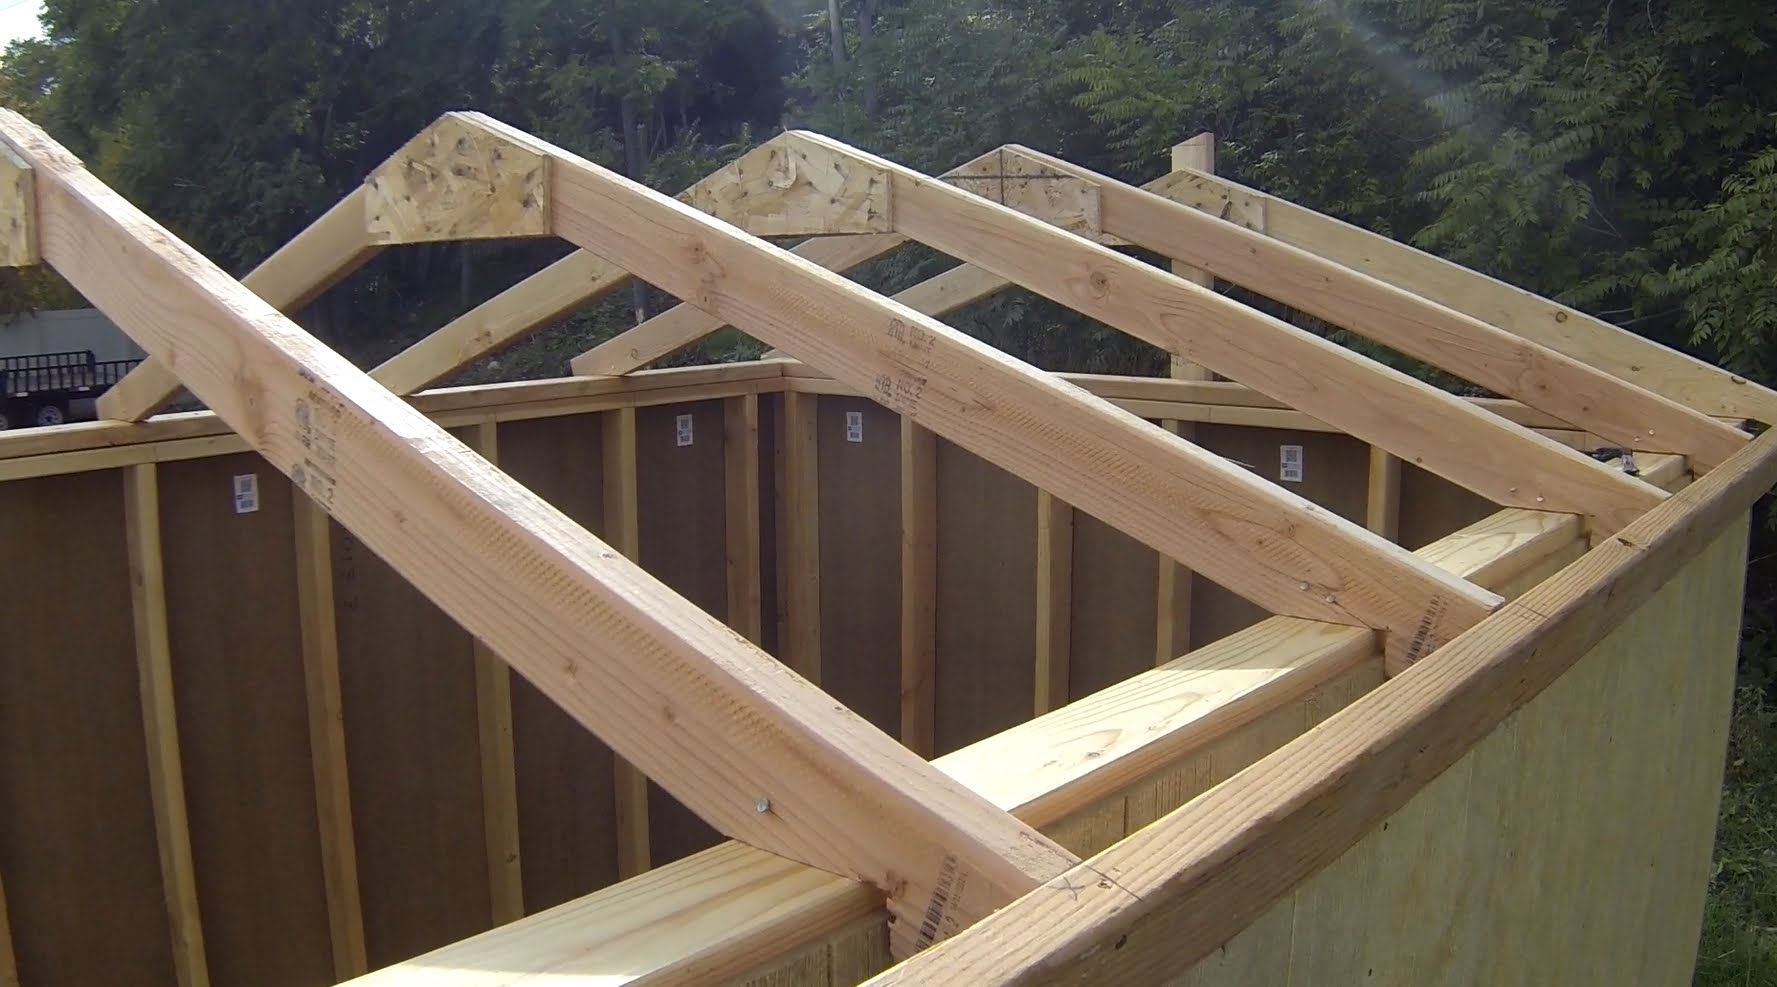 How to Make Roof Trusses? - Universal QA